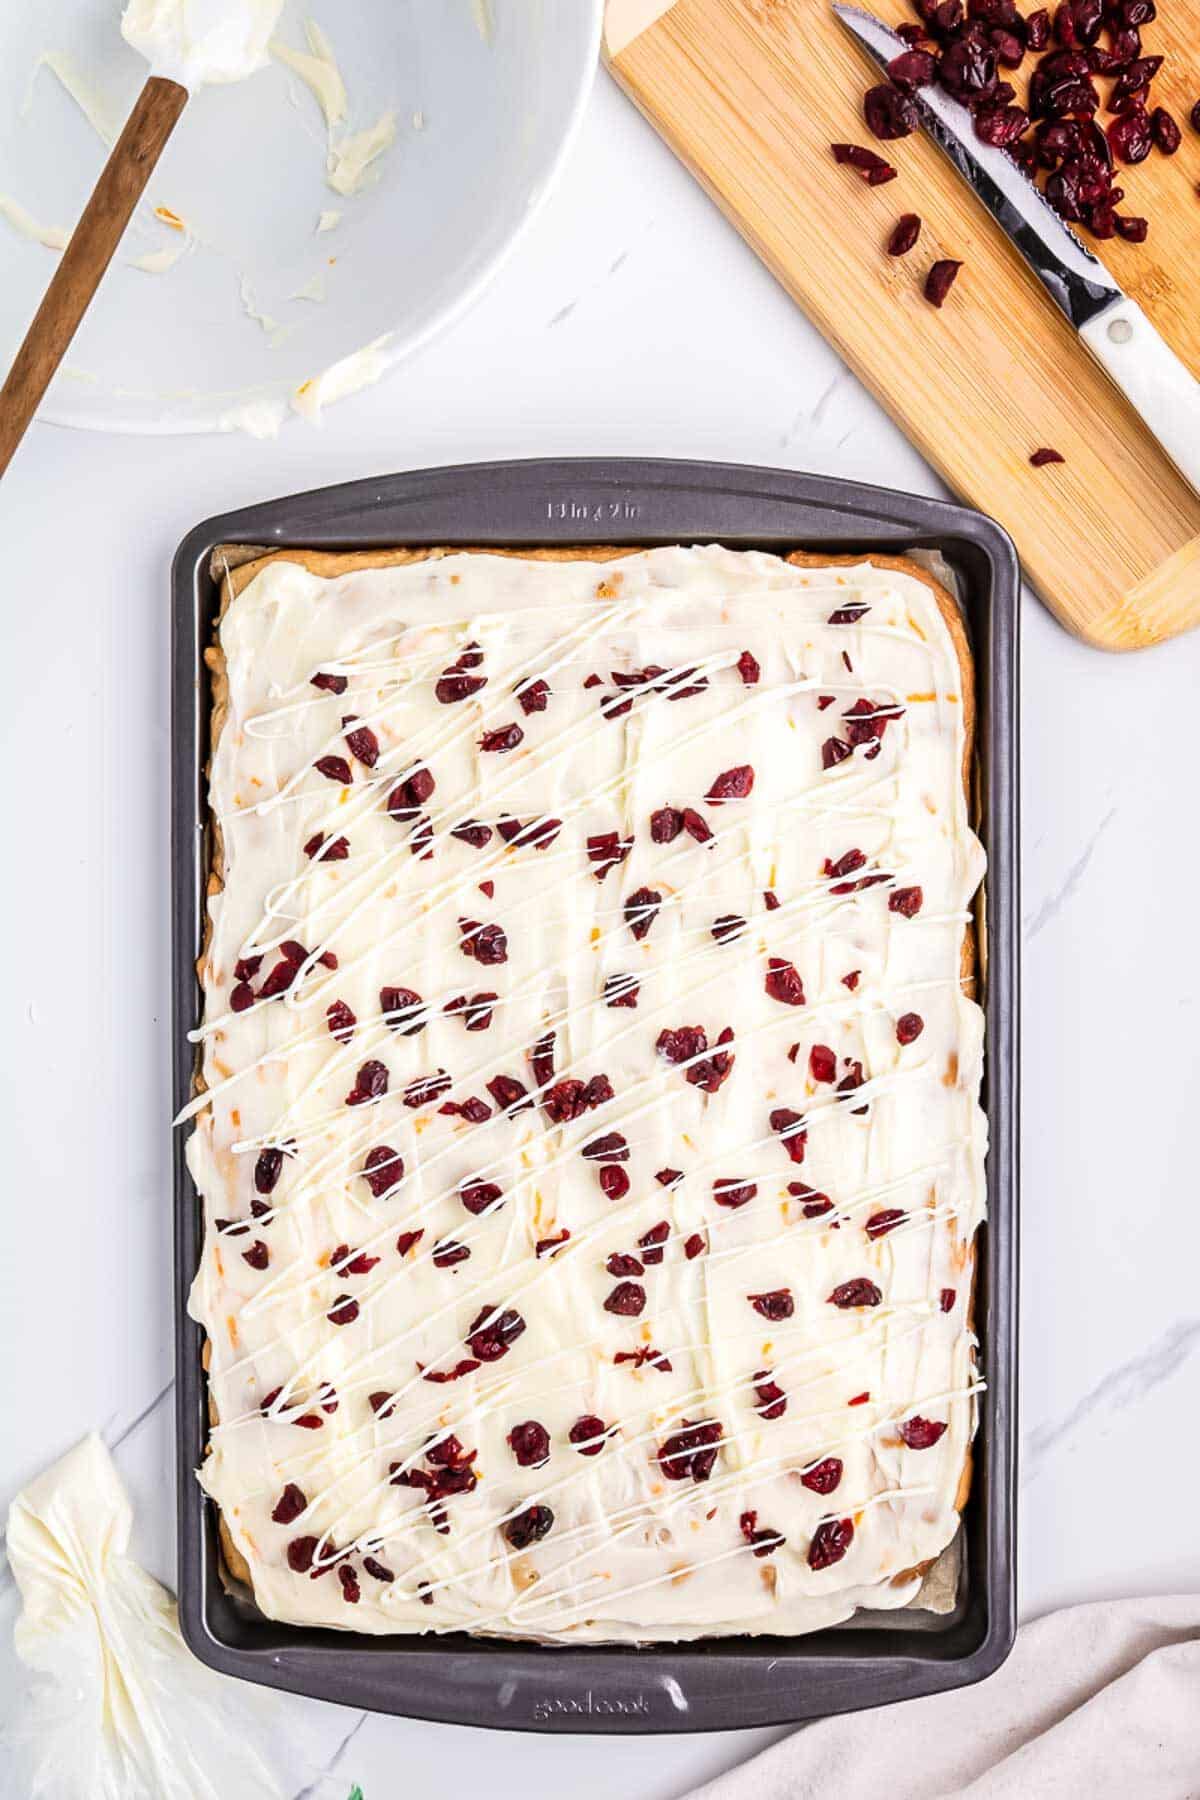 Finished bars with cranberries sprinkled on top and a little white chocolate drizzle over the top 